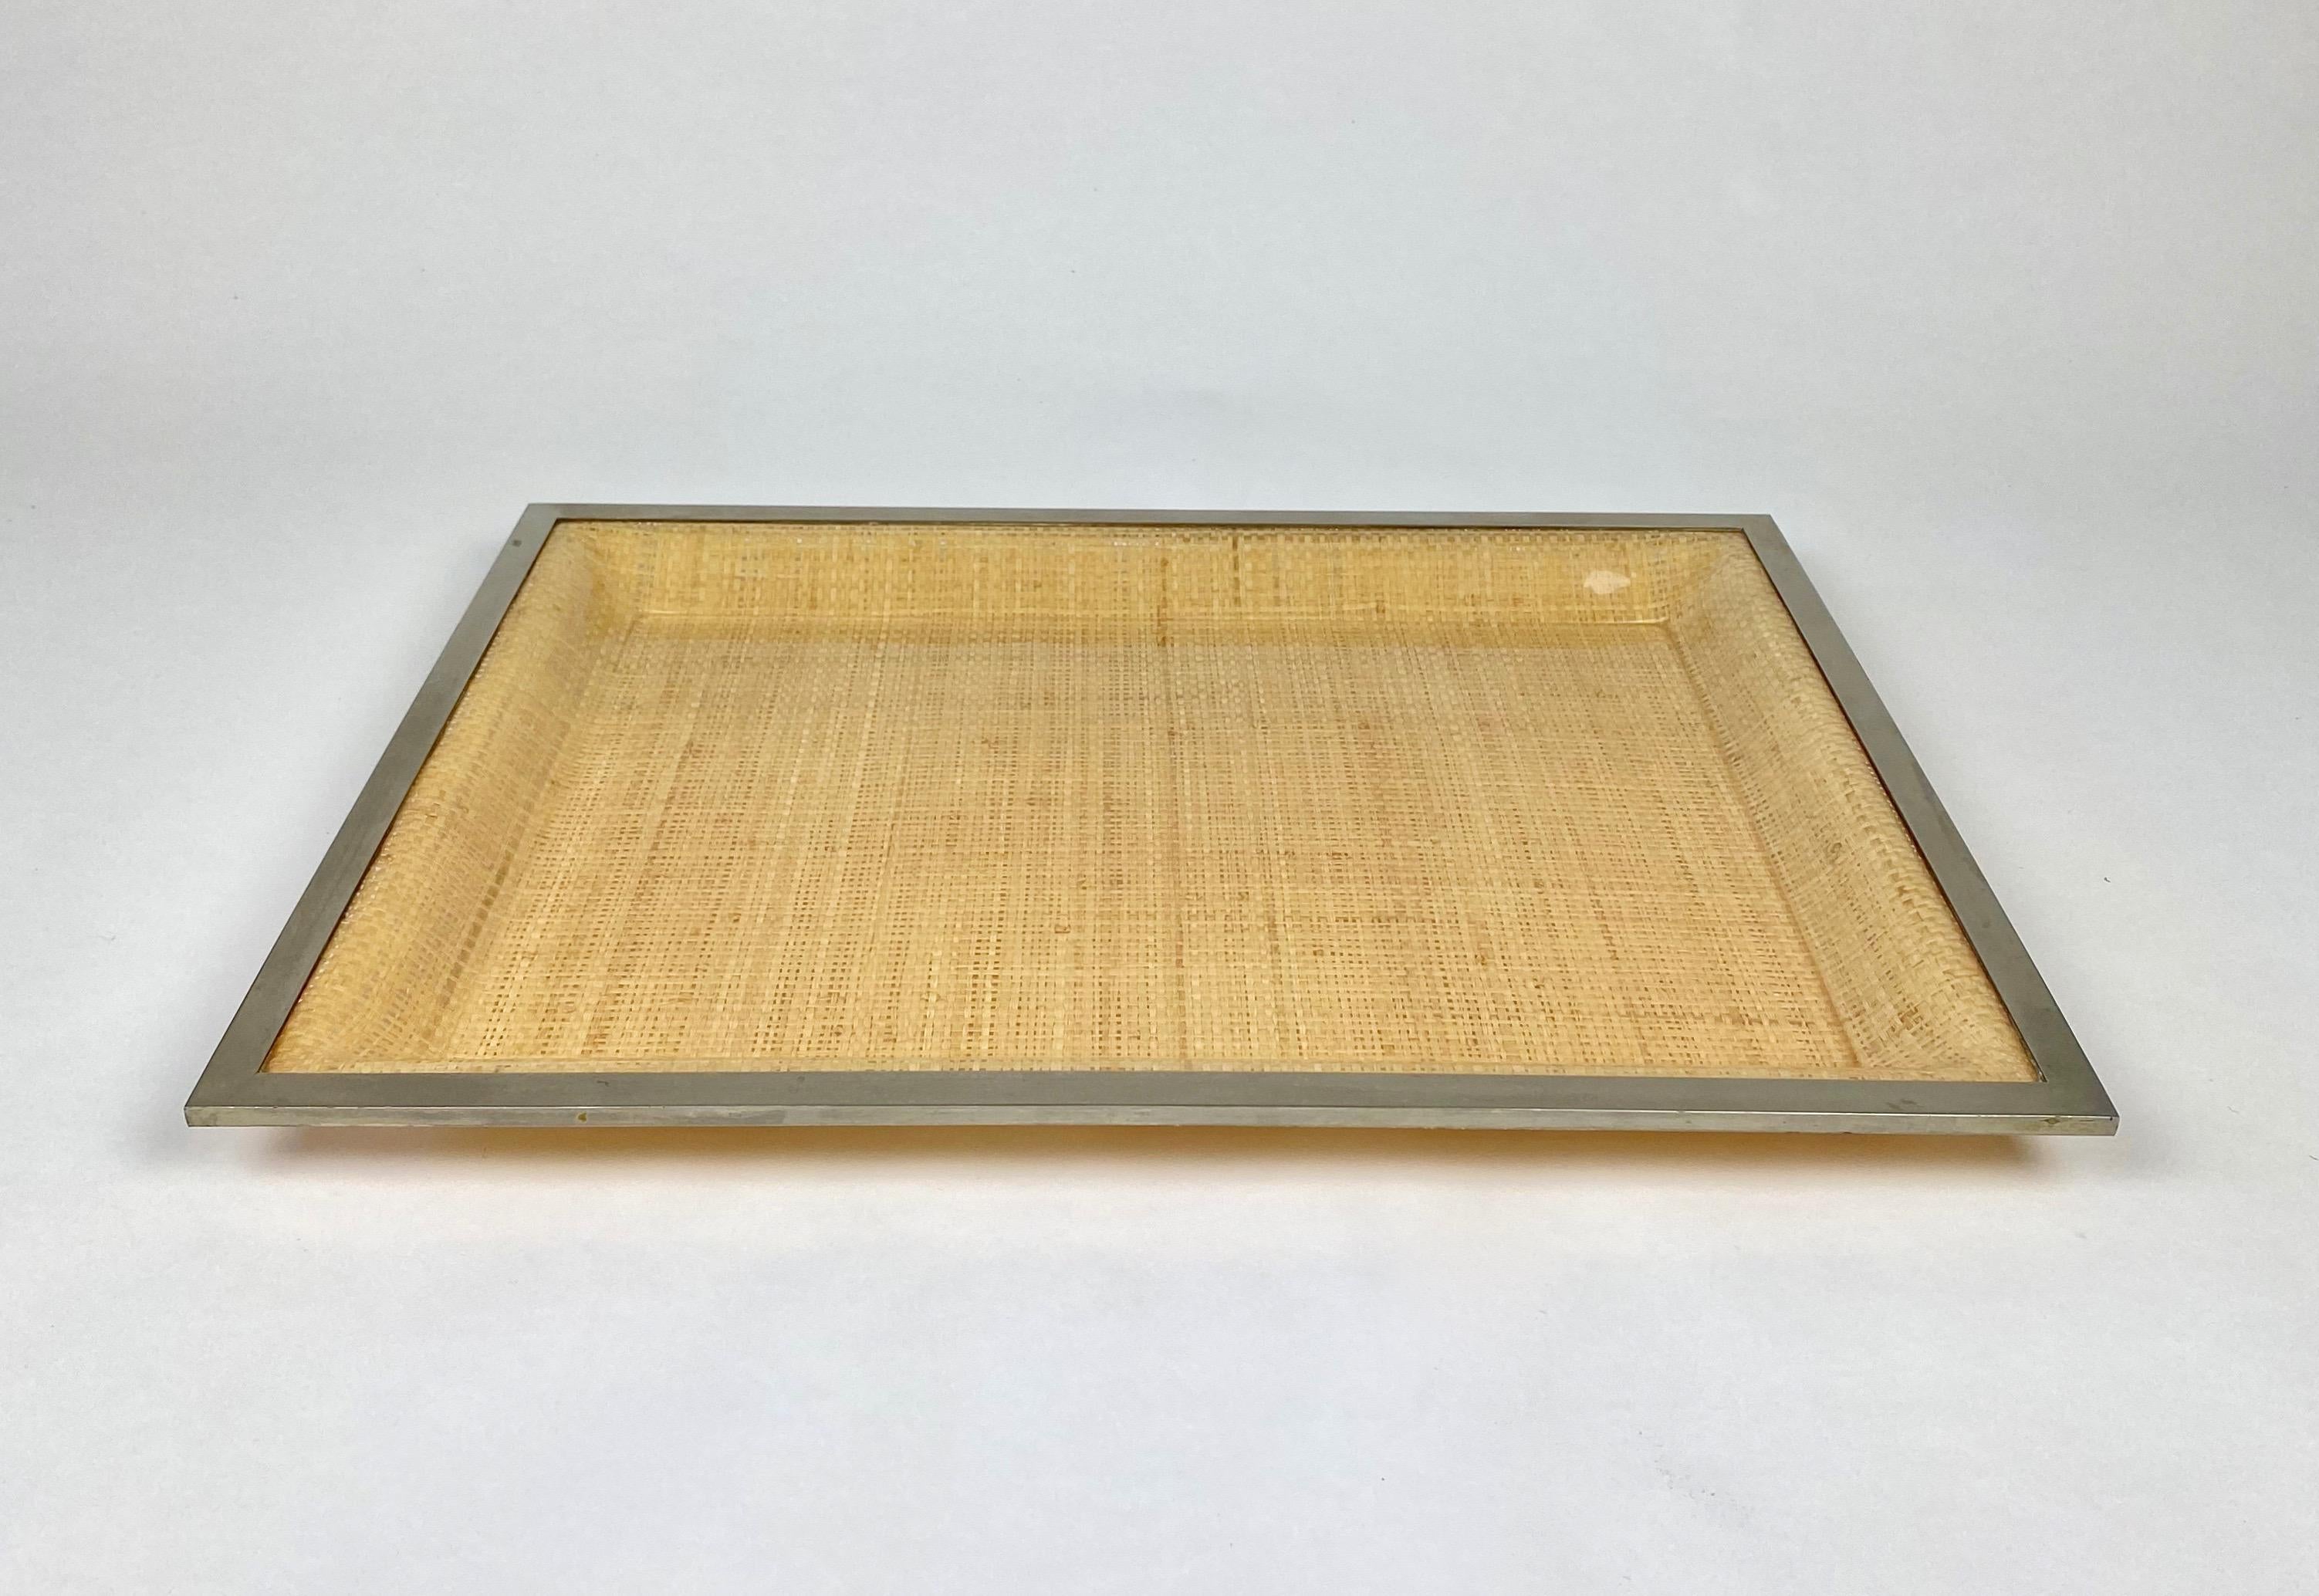 Serving tray in Lucite wicker and metal frame by Janetti Roma Firenze (original label attached on the back), Italy, 1970s.